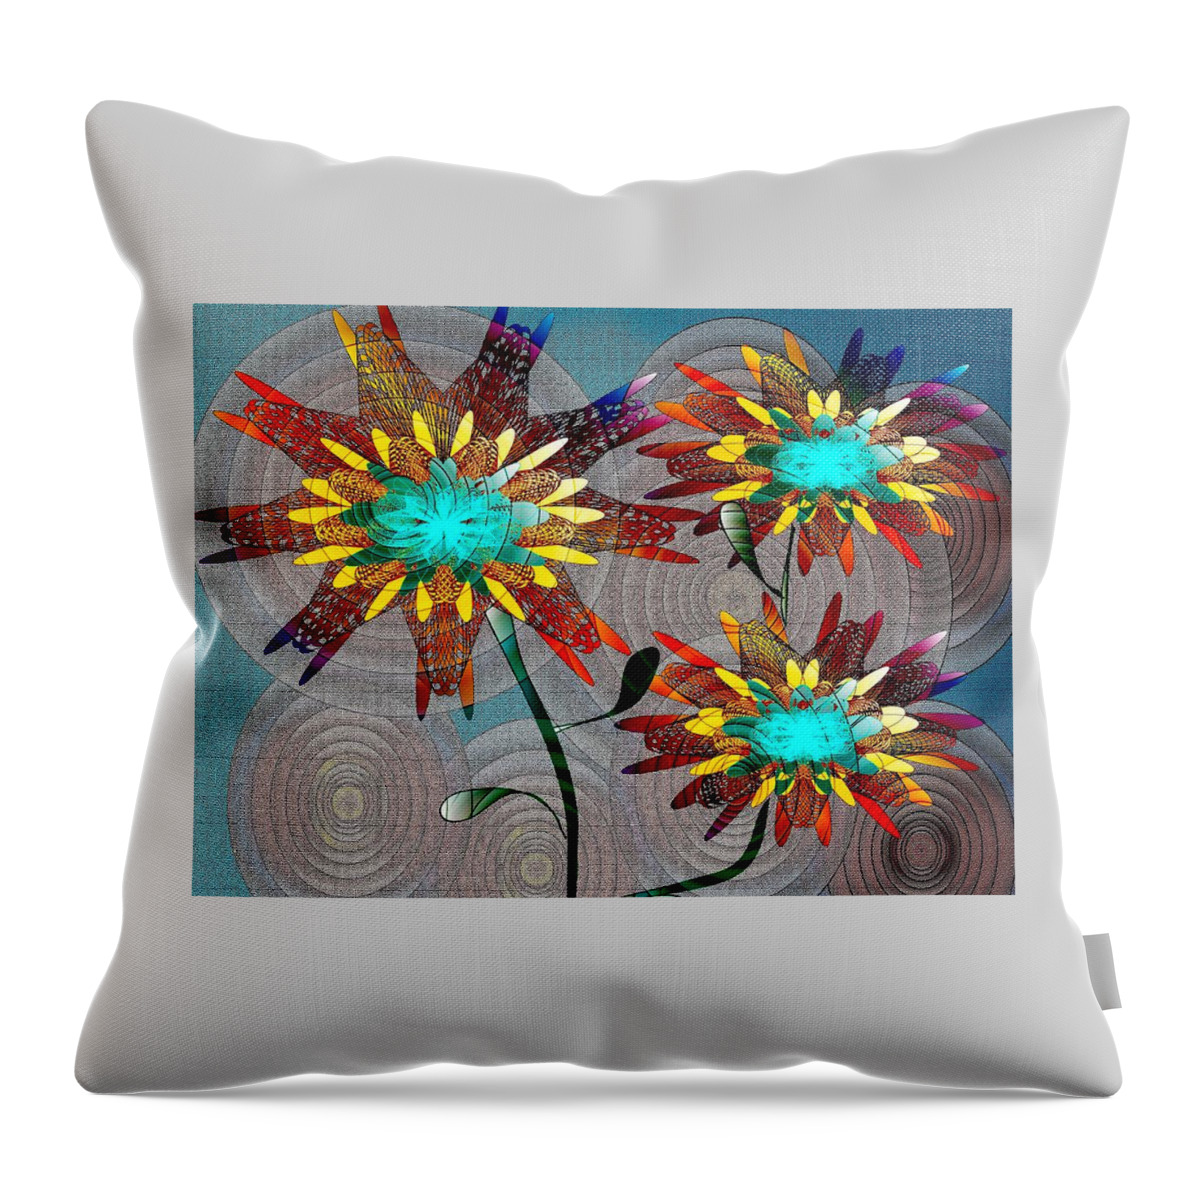  Digital Throw Pillow featuring the drawing Flowering Blooms by Iris Gelbart